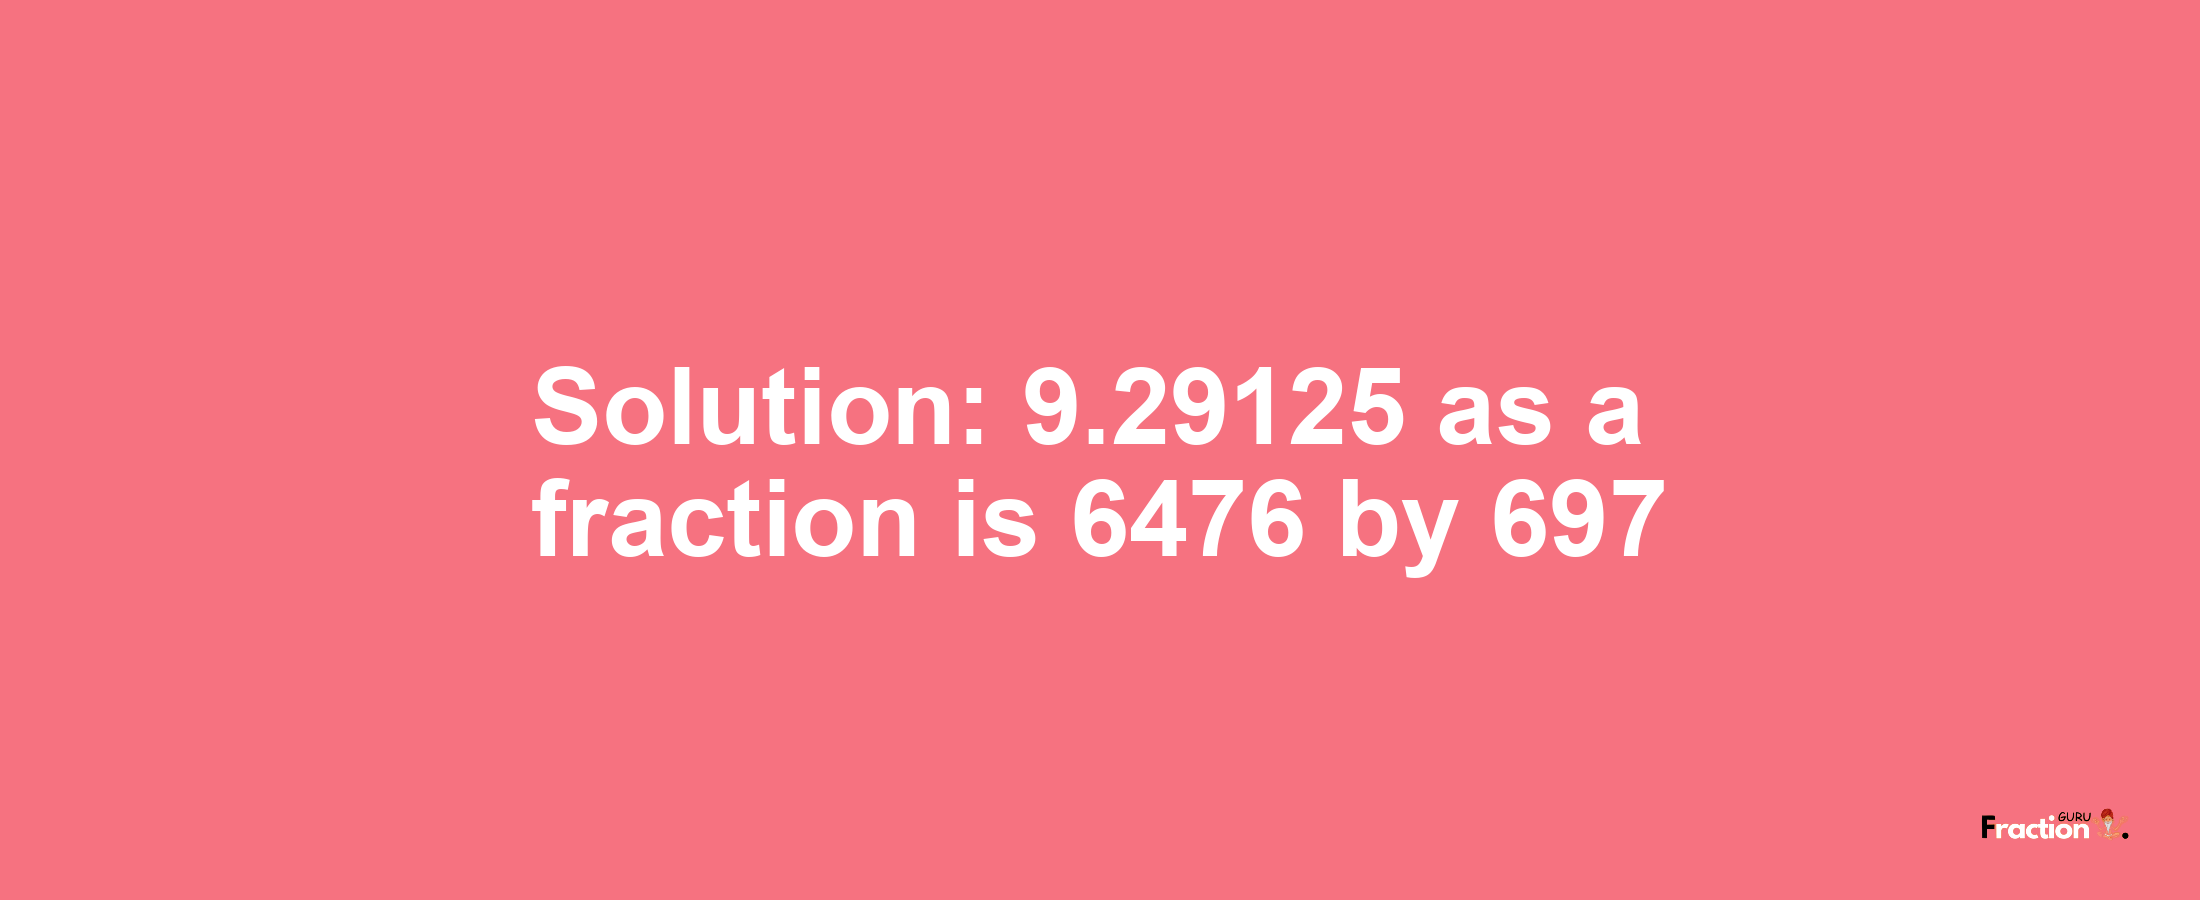 Solution:9.29125 as a fraction is 6476/697